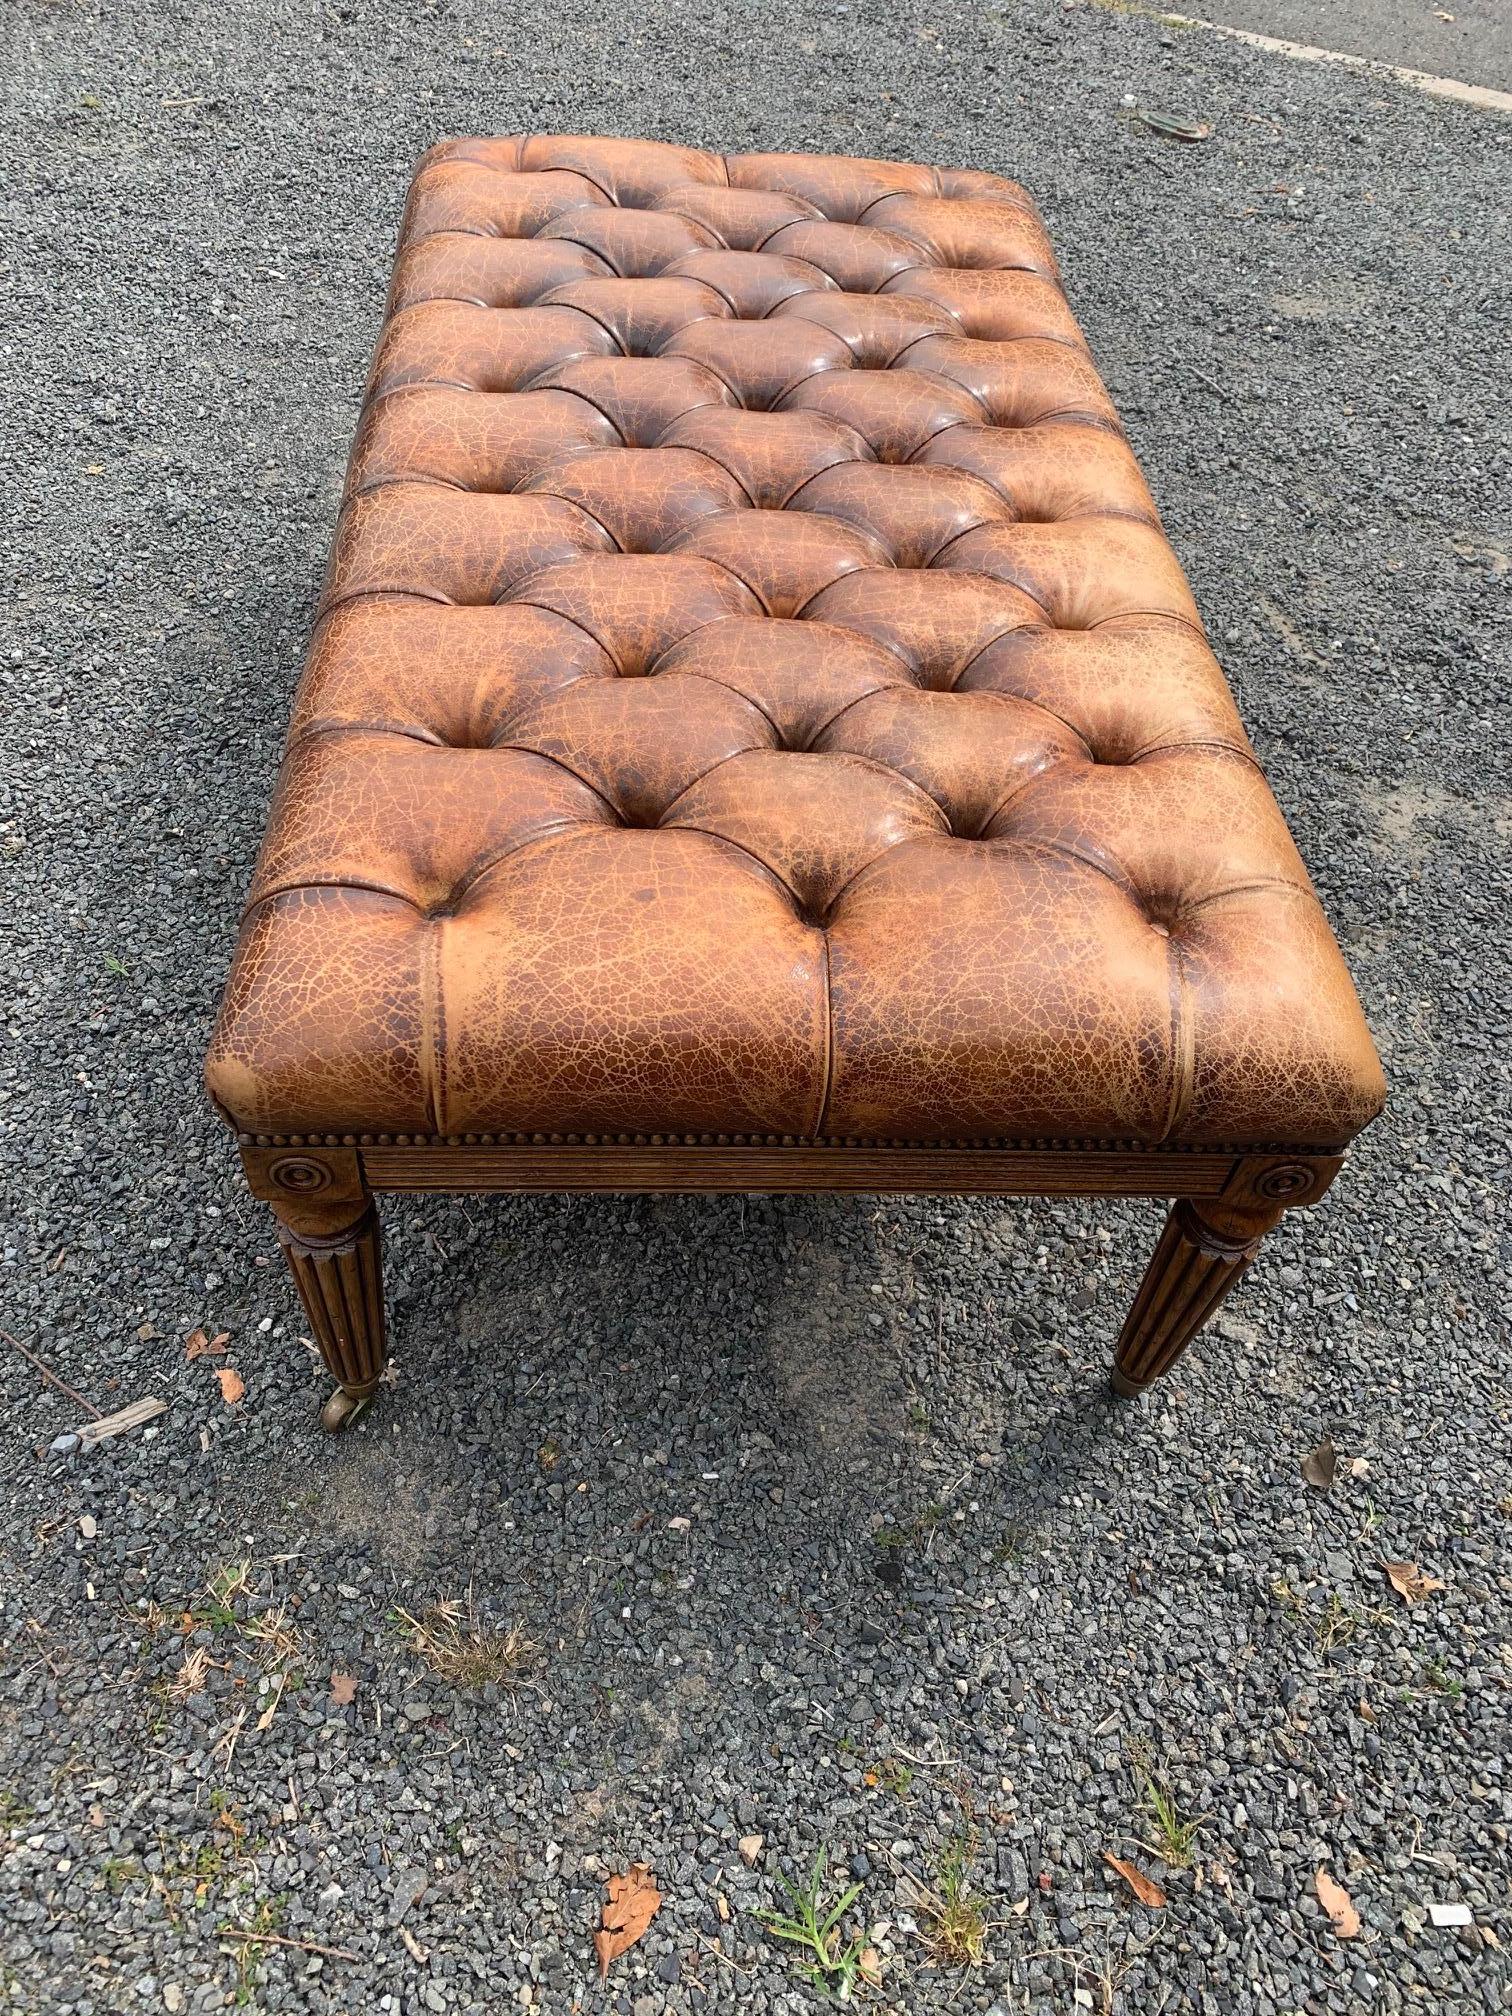 A hard to find handsome English 19th century tufted leather ottoman with brass nailhead details. The carved mahogany base includes reeded tapered legs that terminate in brass casters.
   